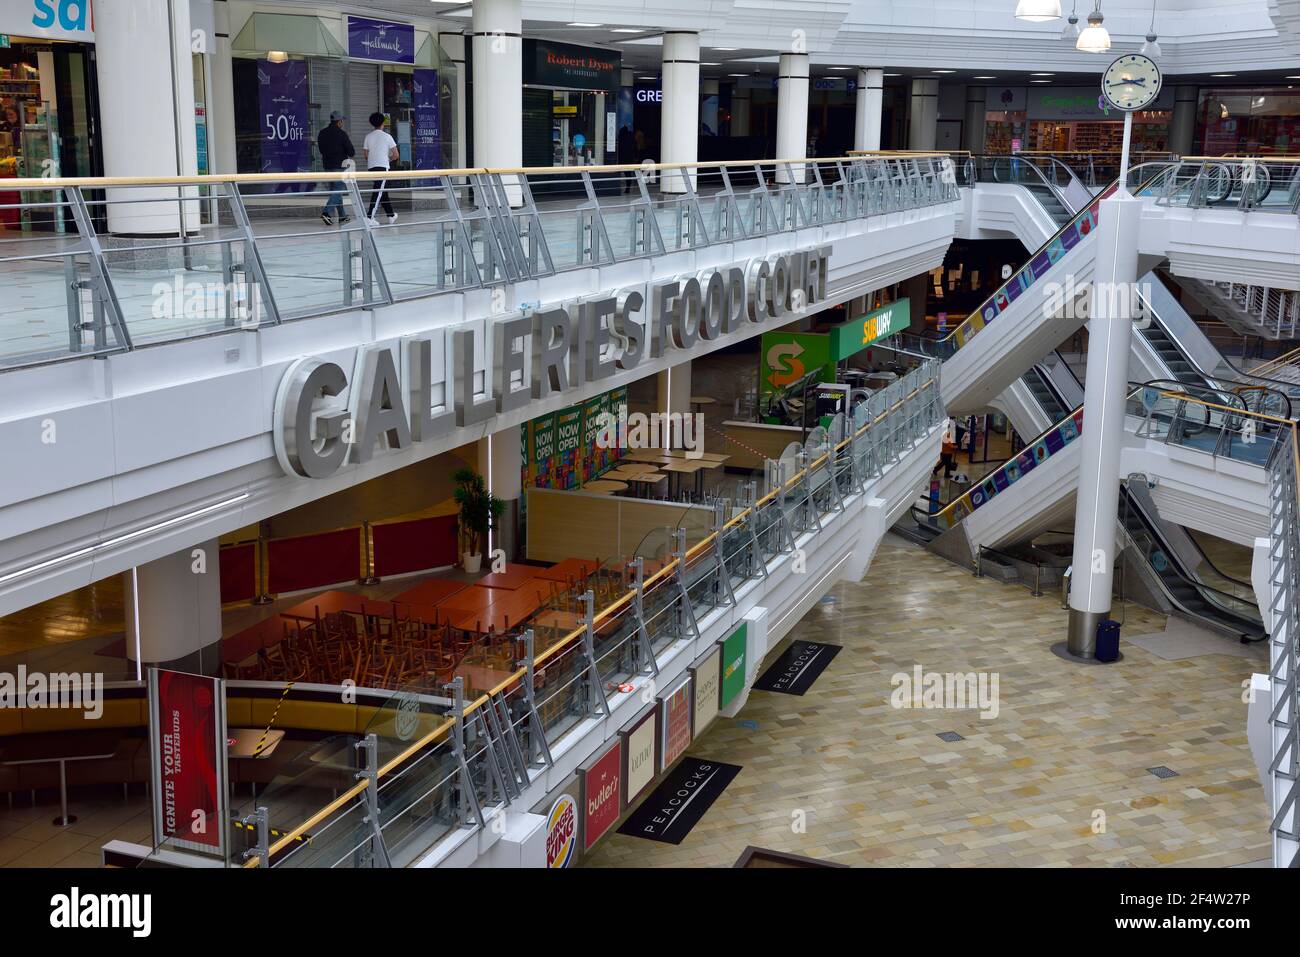 Inside large normally busy shopping centre nearly empty mid afternoon Saterday with shops  food court closed during lockdown due to Covid-19 pandemic, Stock Photo